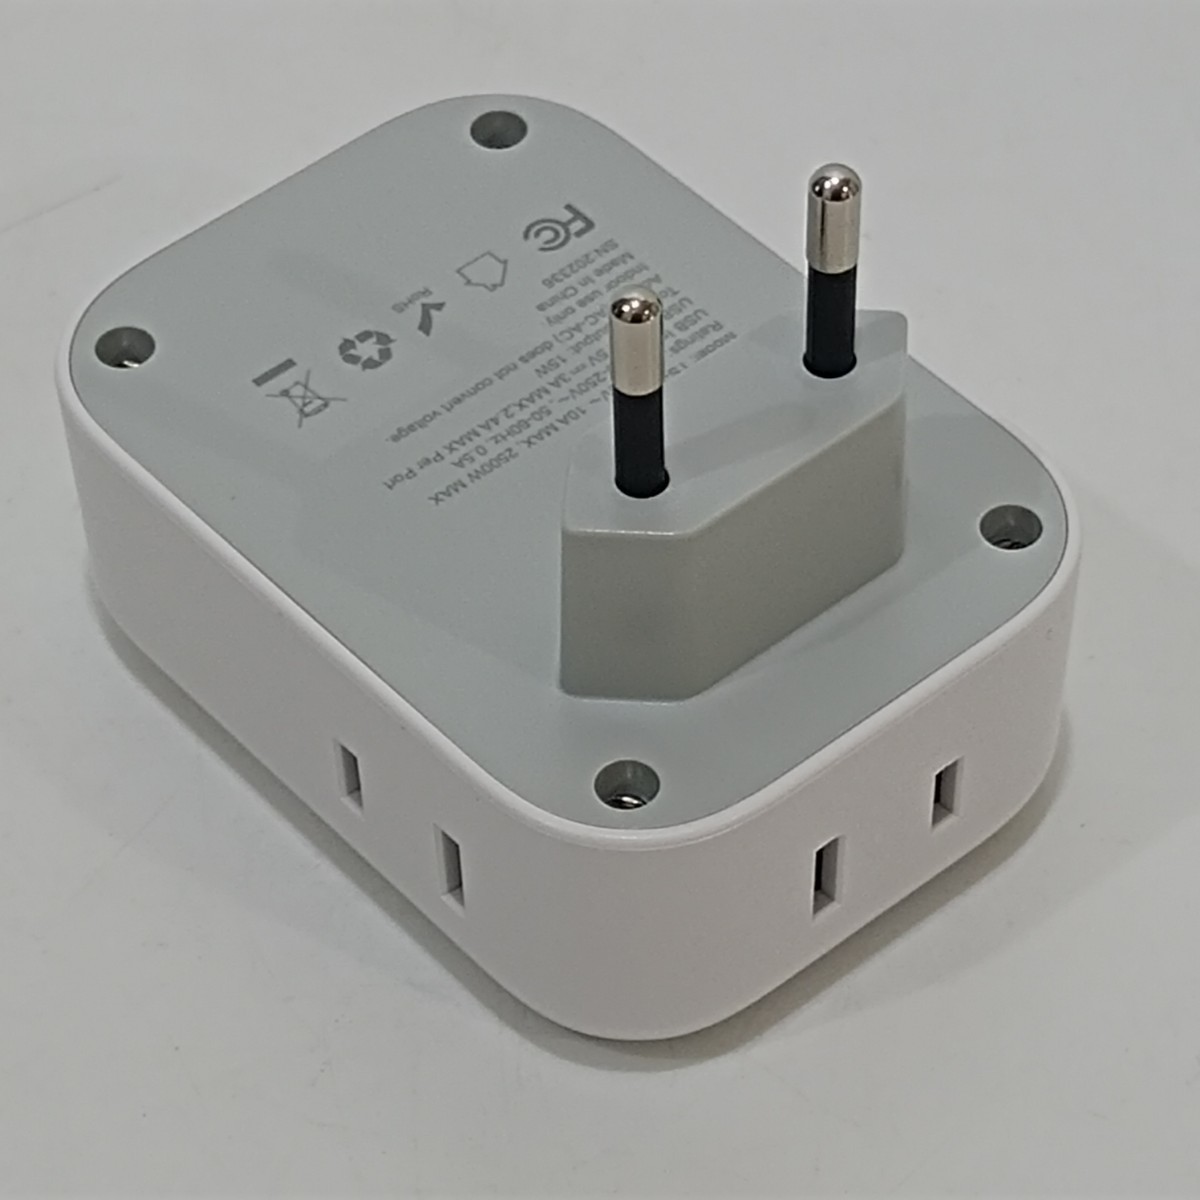  conversion plug traveling abroad for C type outlet conversion adaptor charge power supply exchange 3USB y1101-1